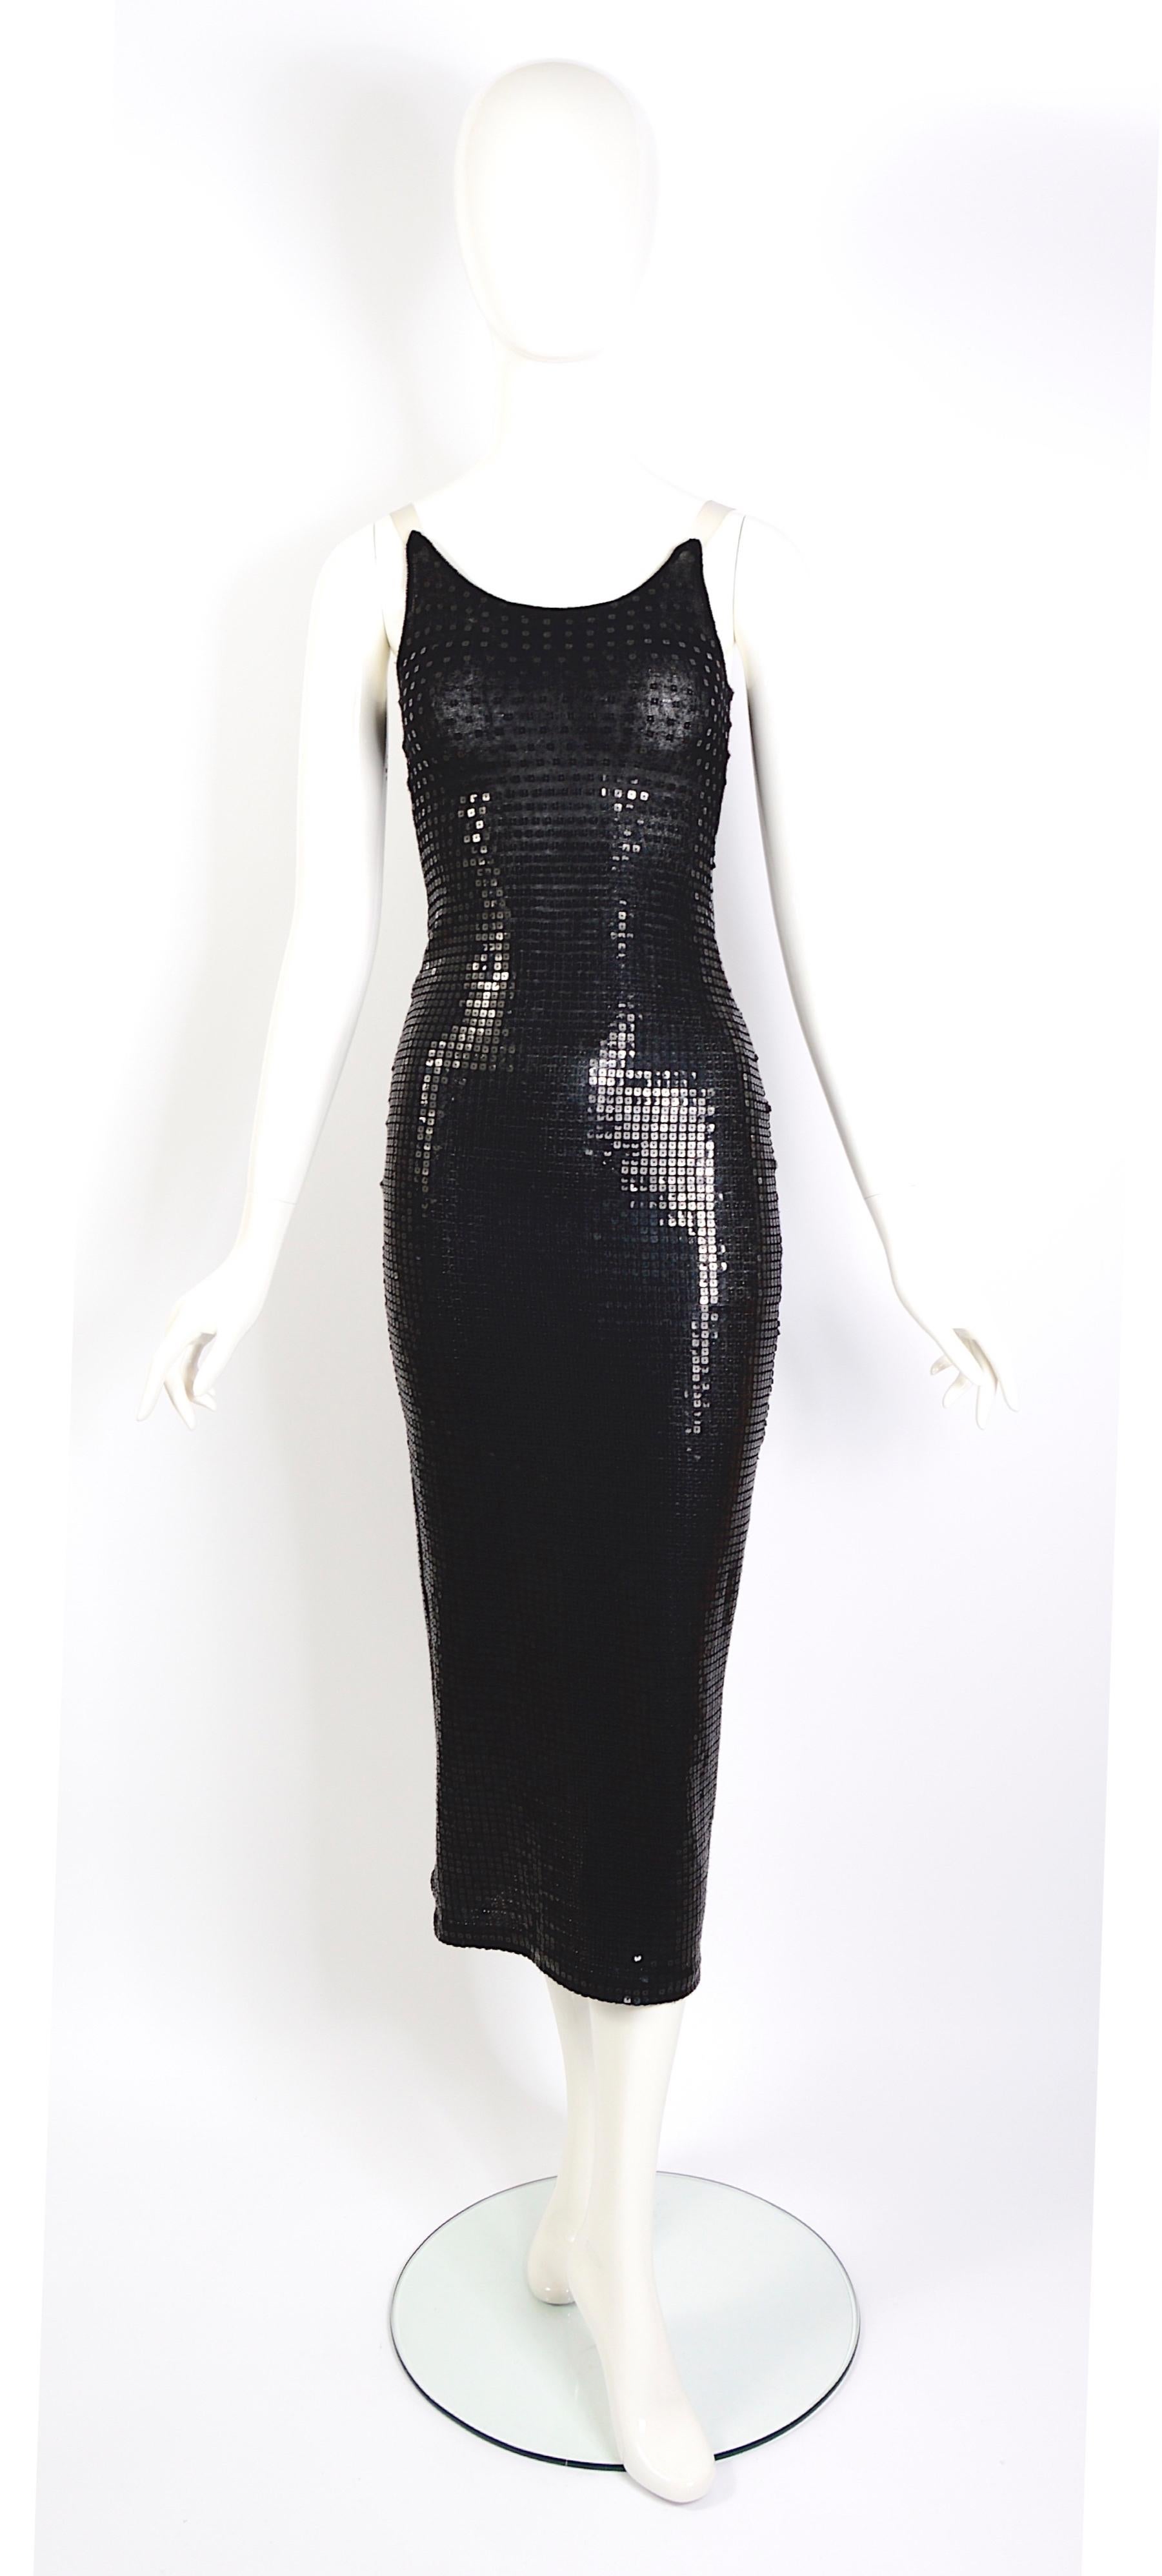 Thierry Mugler vintage 1990s black fine knit embellished sequined slip party dress.
Size is in between a French 34 or 36. it depends on how tight you want to wear the dress. Our doll is a french 36
Measurements that are taken flat without stretching